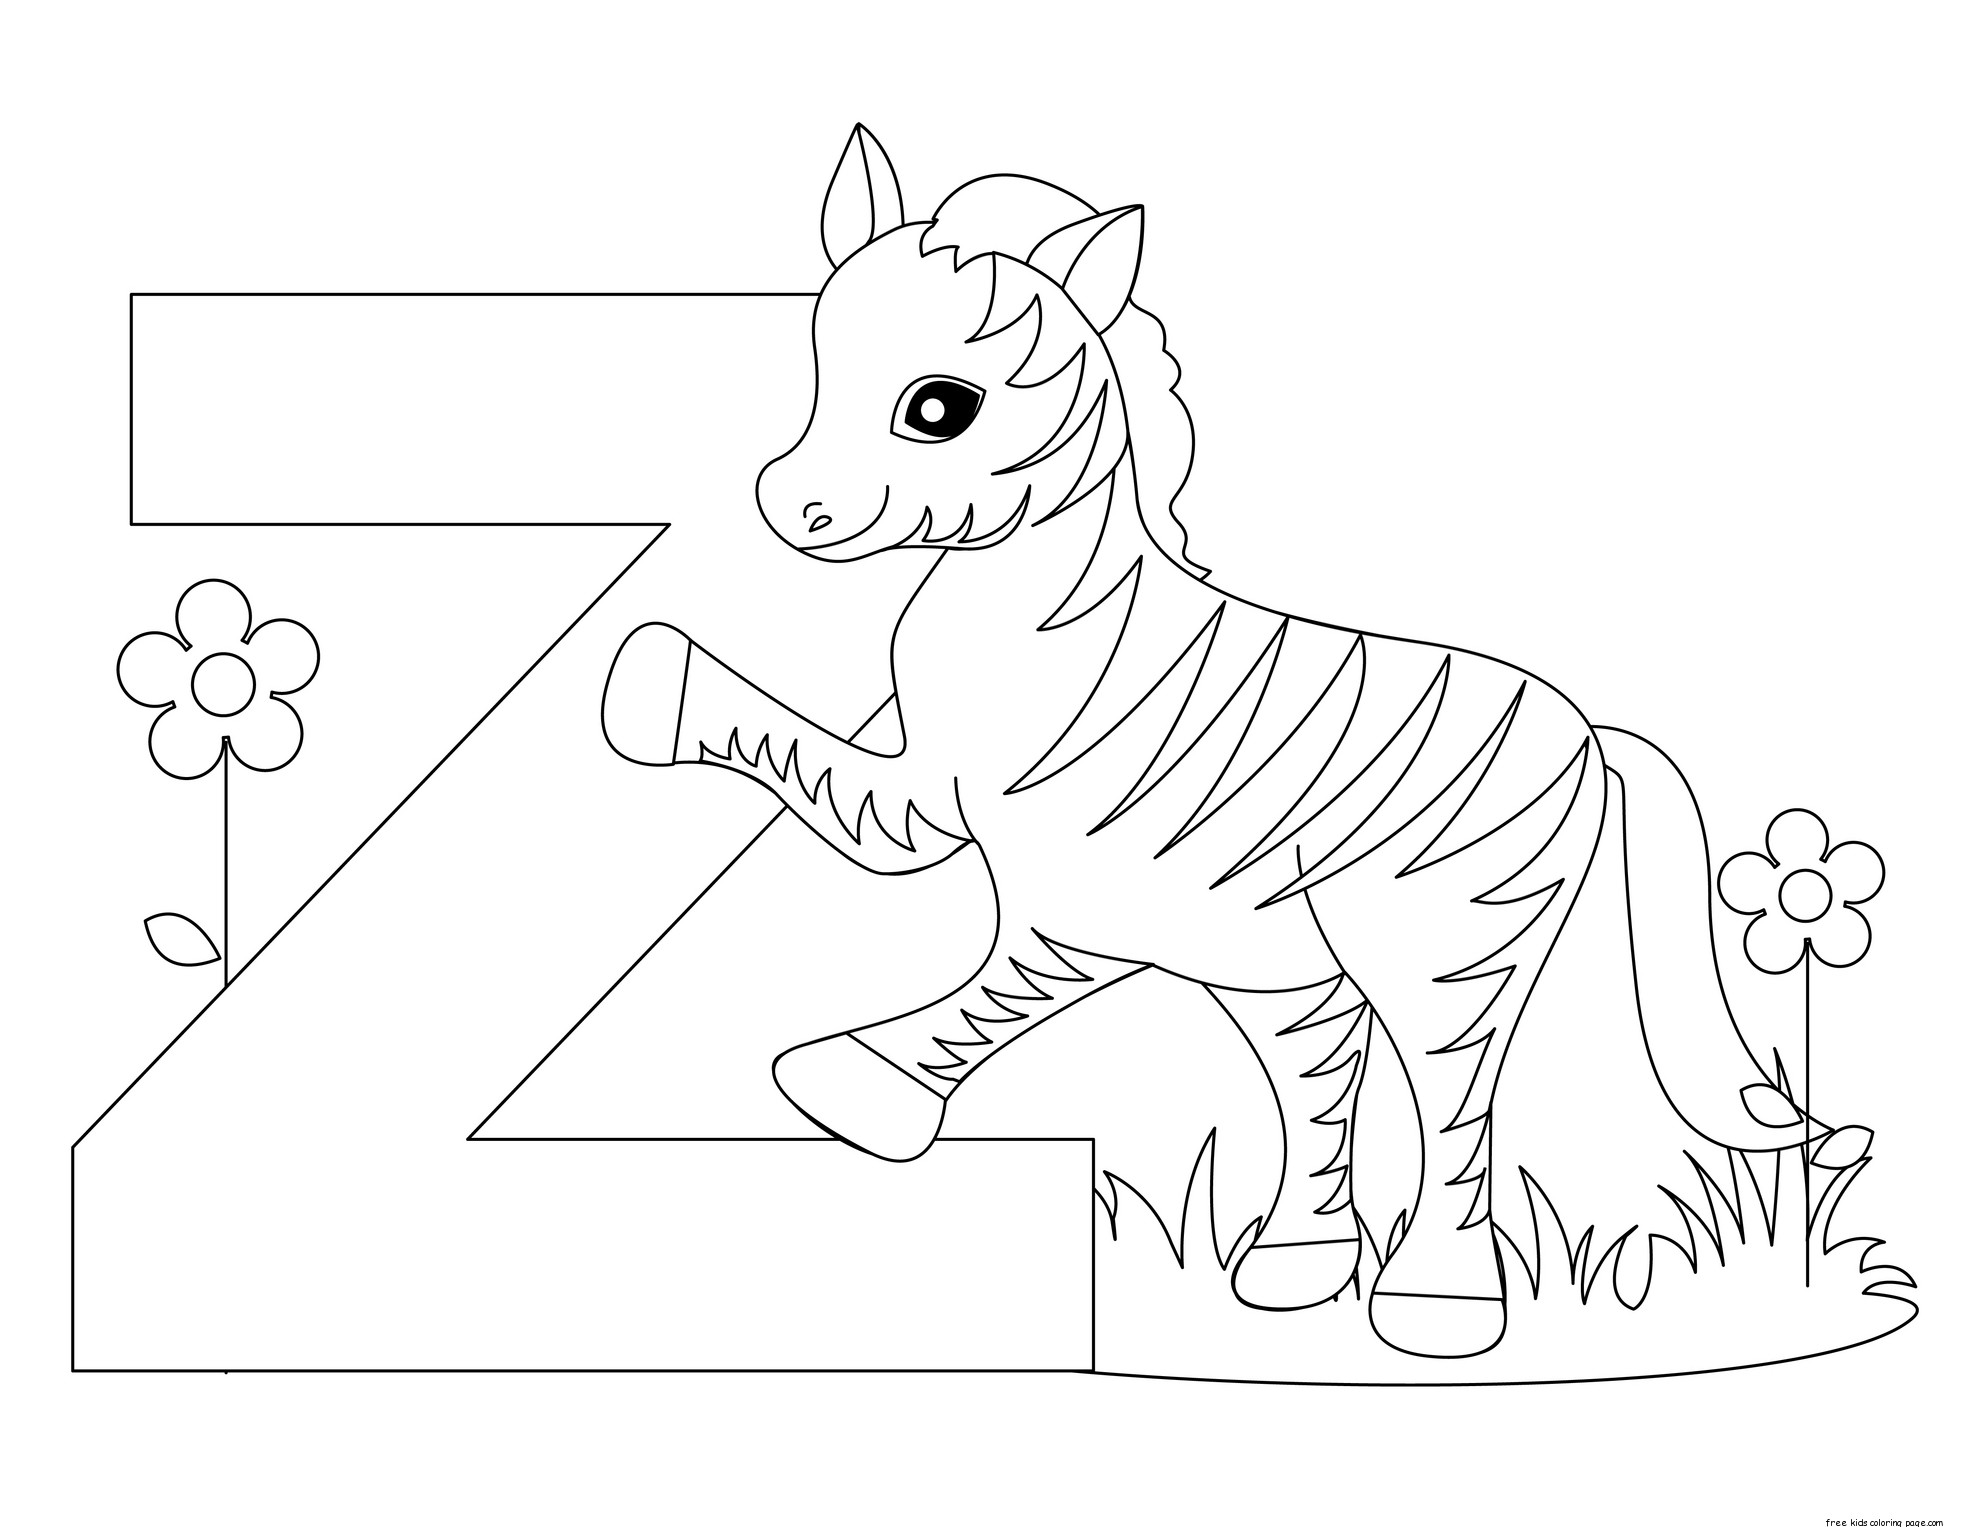 z coloring book pages - photo #13